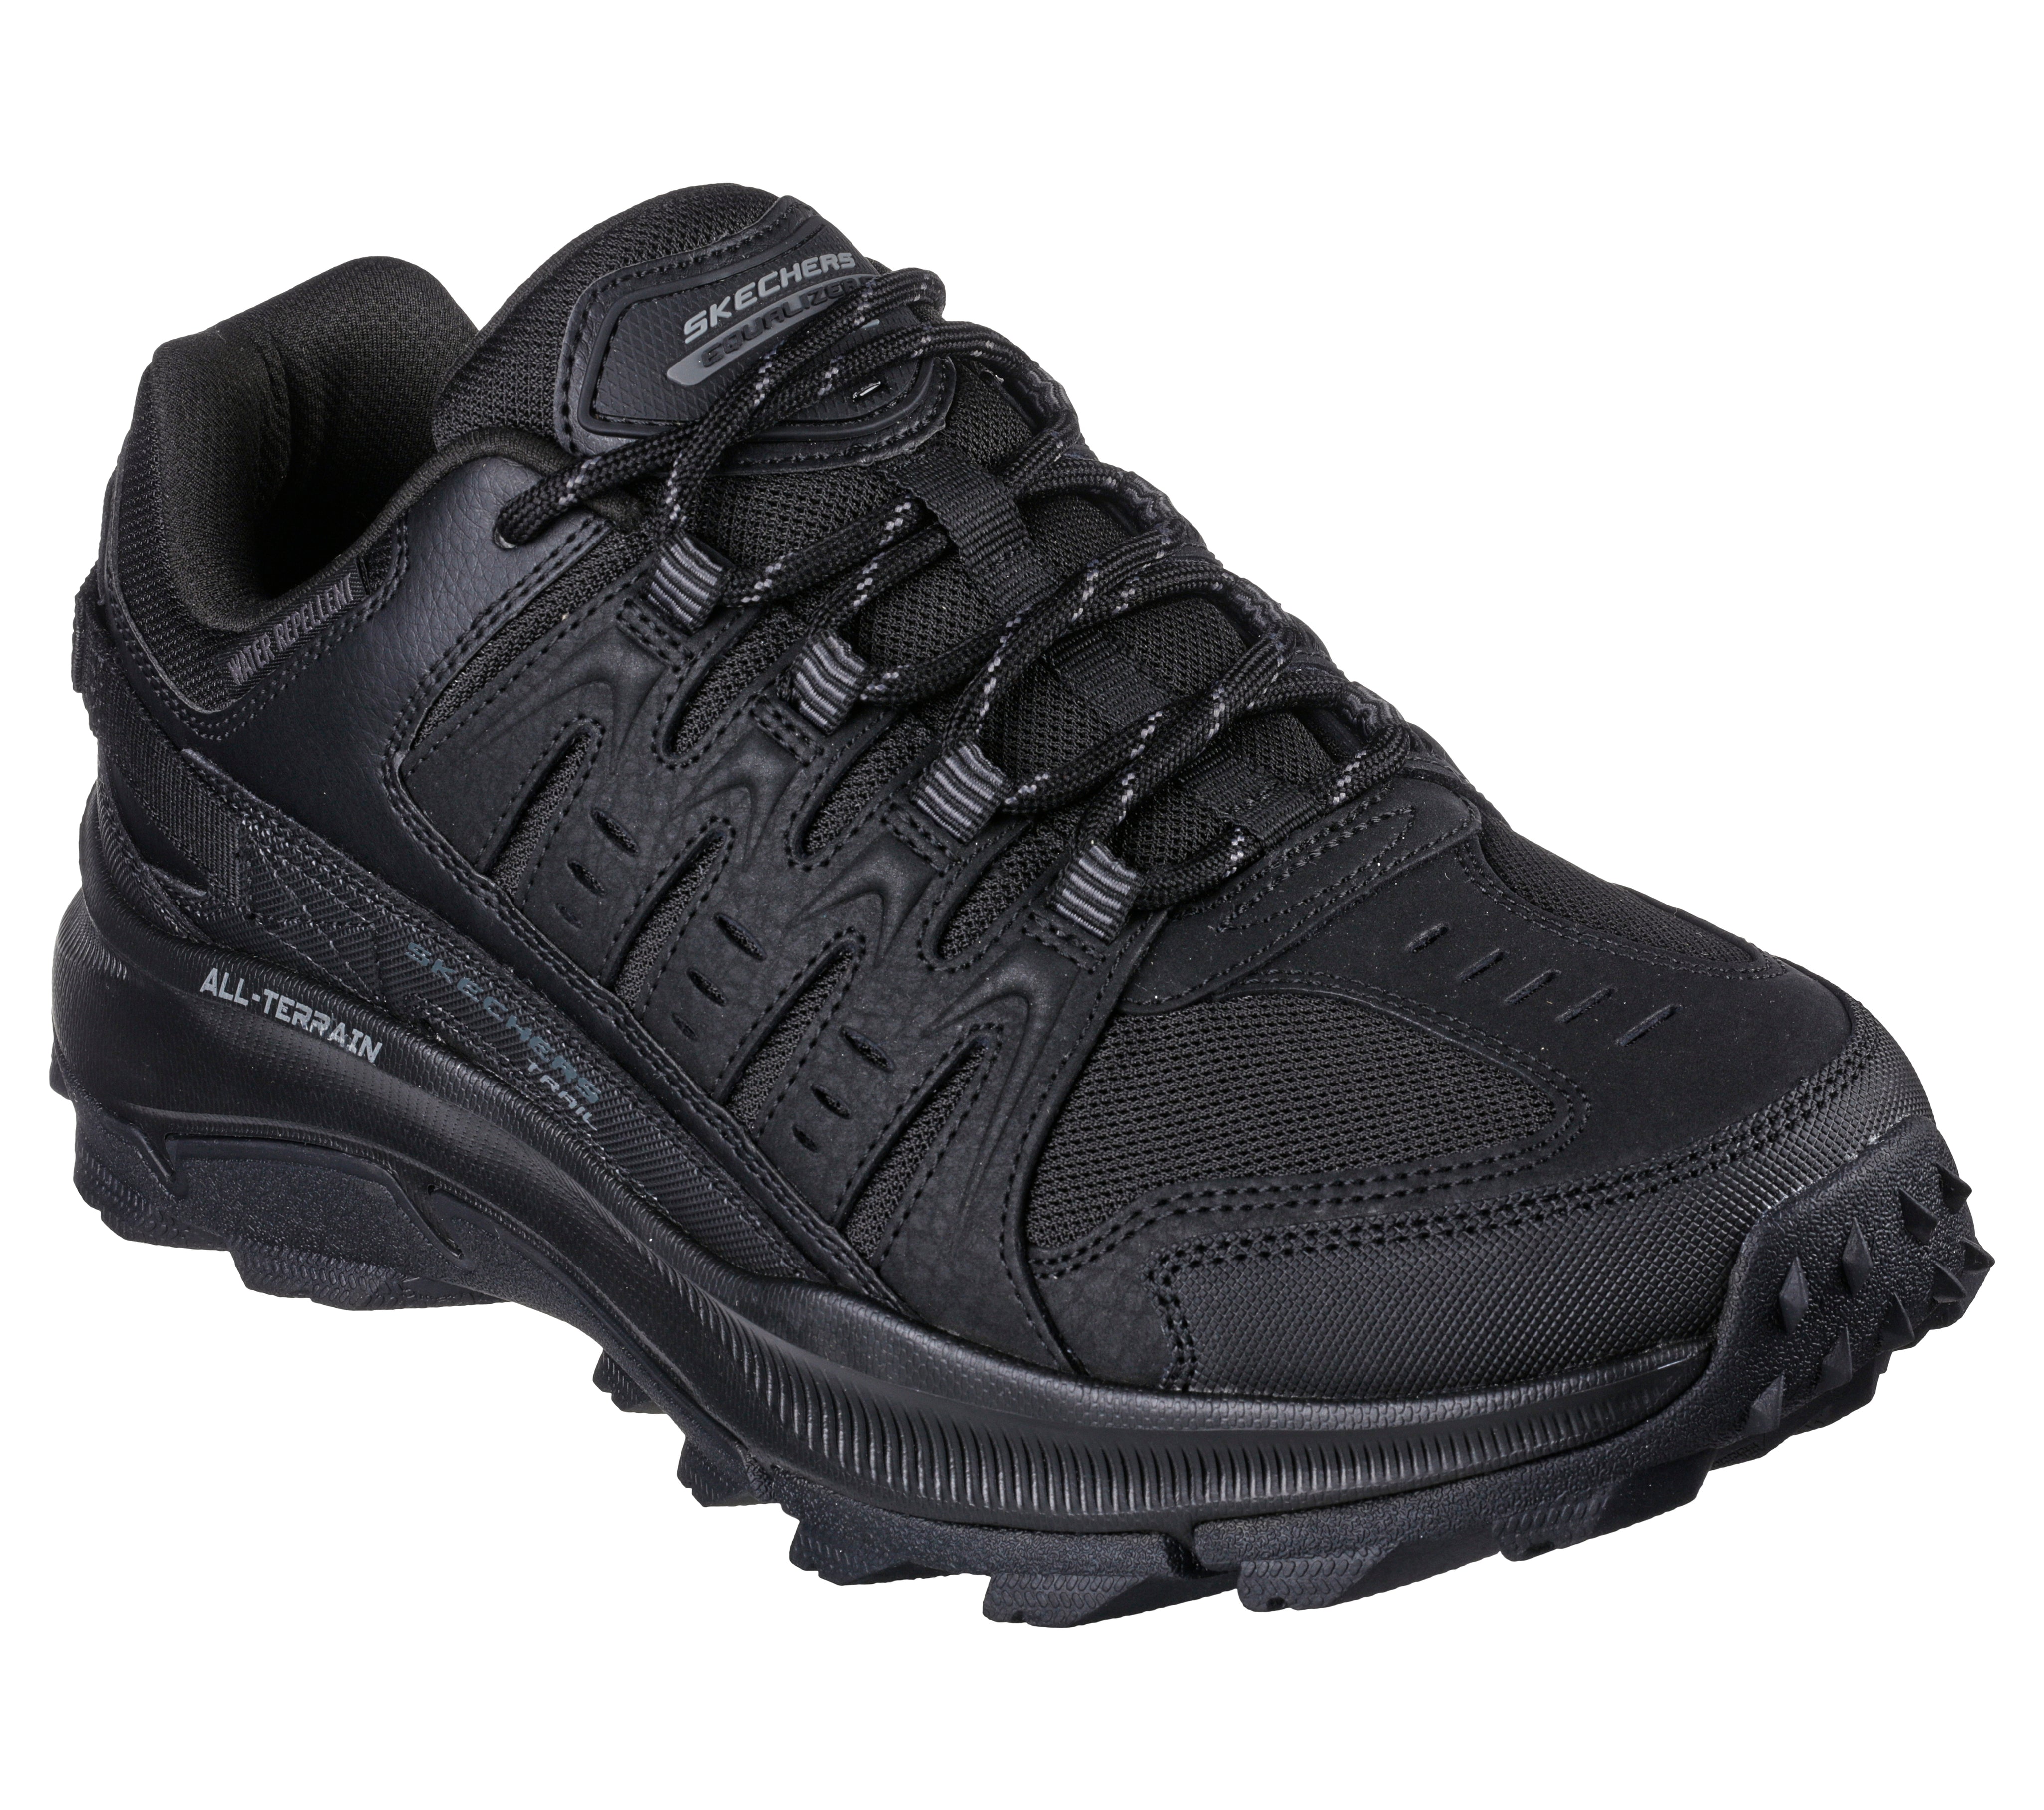 237501WW - RELAXED FIT: EQUALIZER 5.0 TRAIL - SOLIX (EXTRA WIDE)